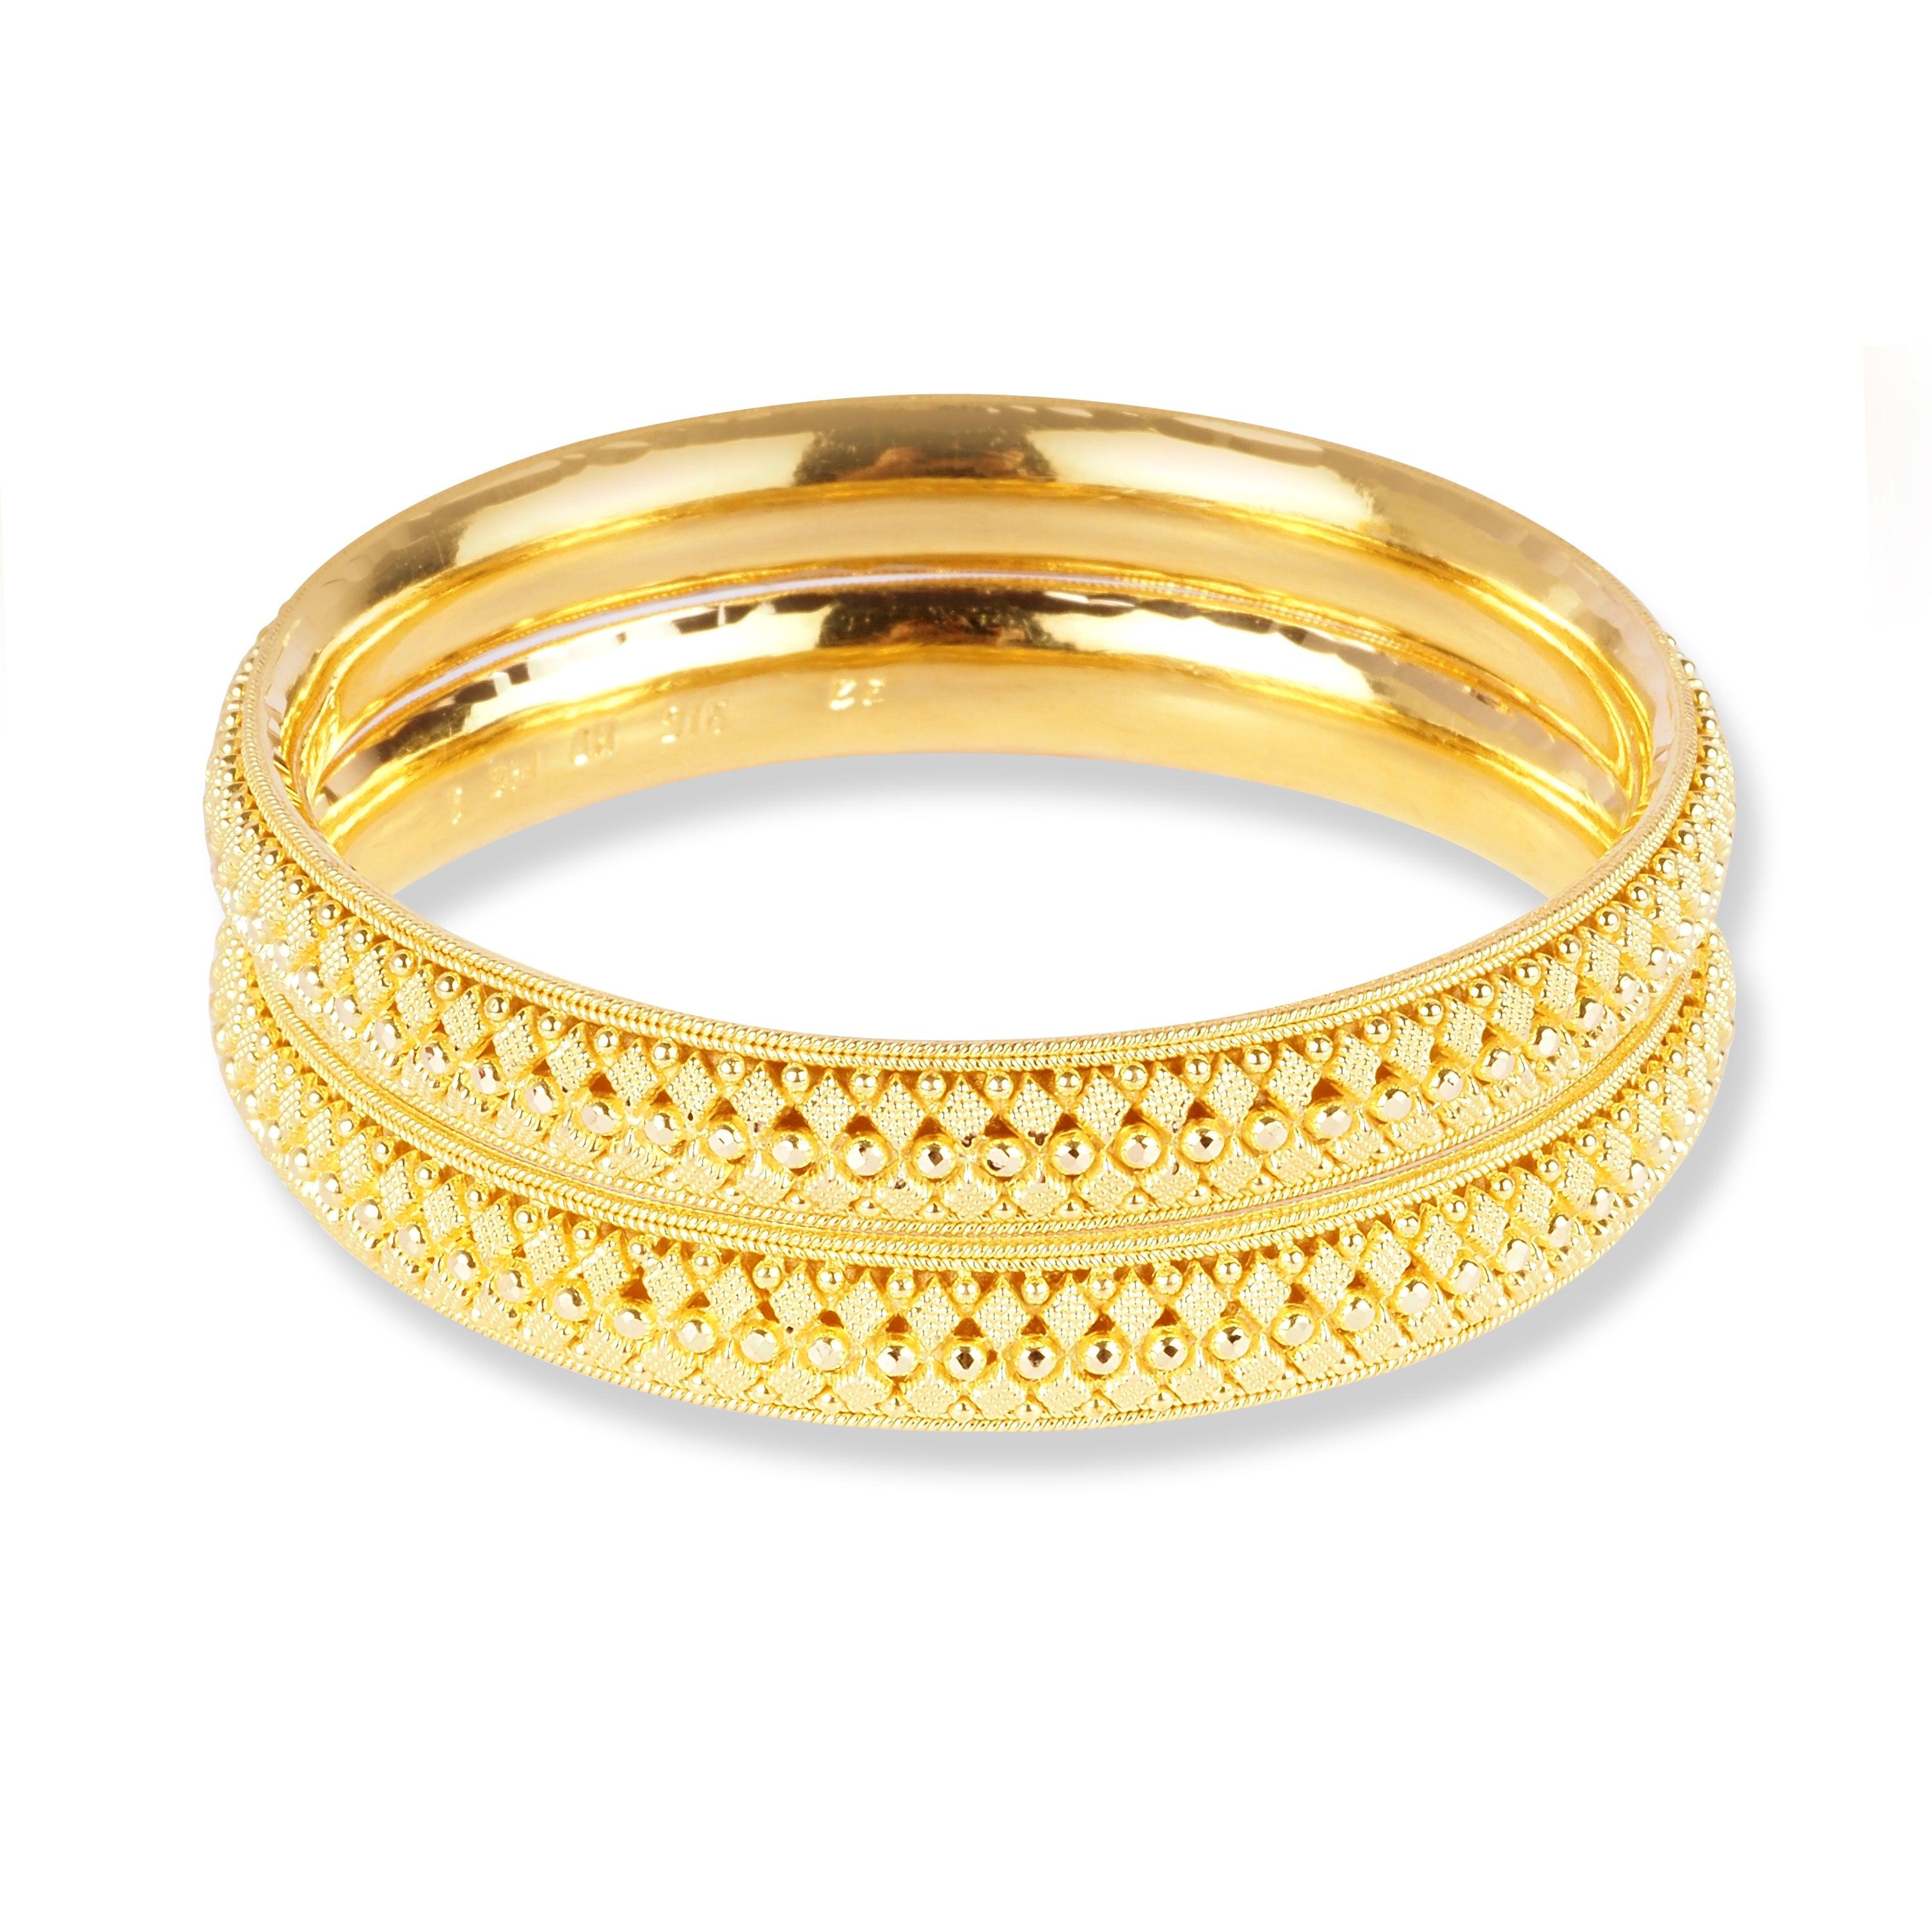 22ct Gold Set of Two Bangles with Filigree Work in Comfort Fit Finish B-8547 - Minar Jewellers